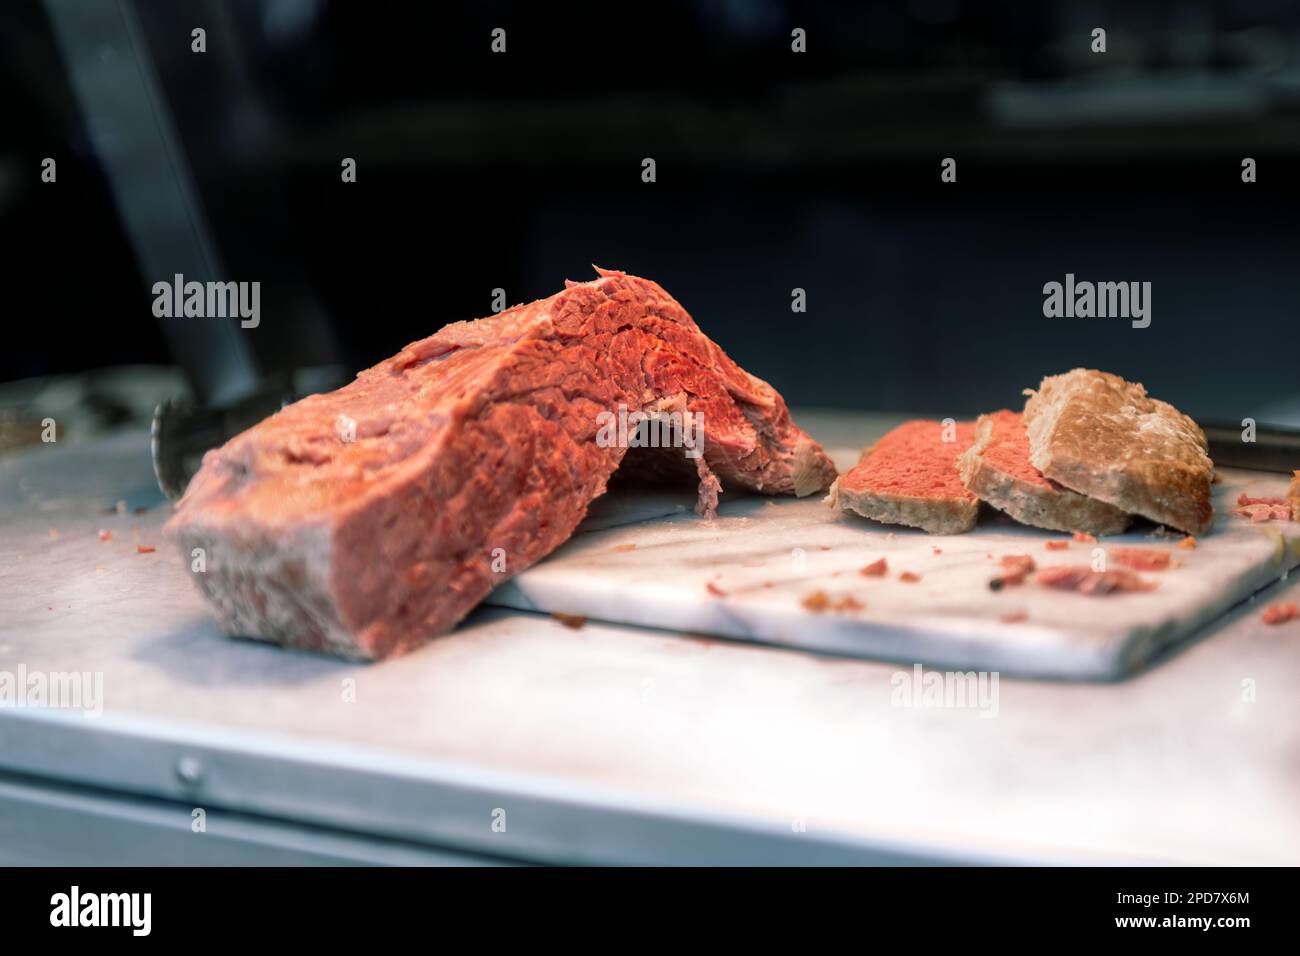 A joint of cut meat on a marble slab in a deli store. Stock Photo